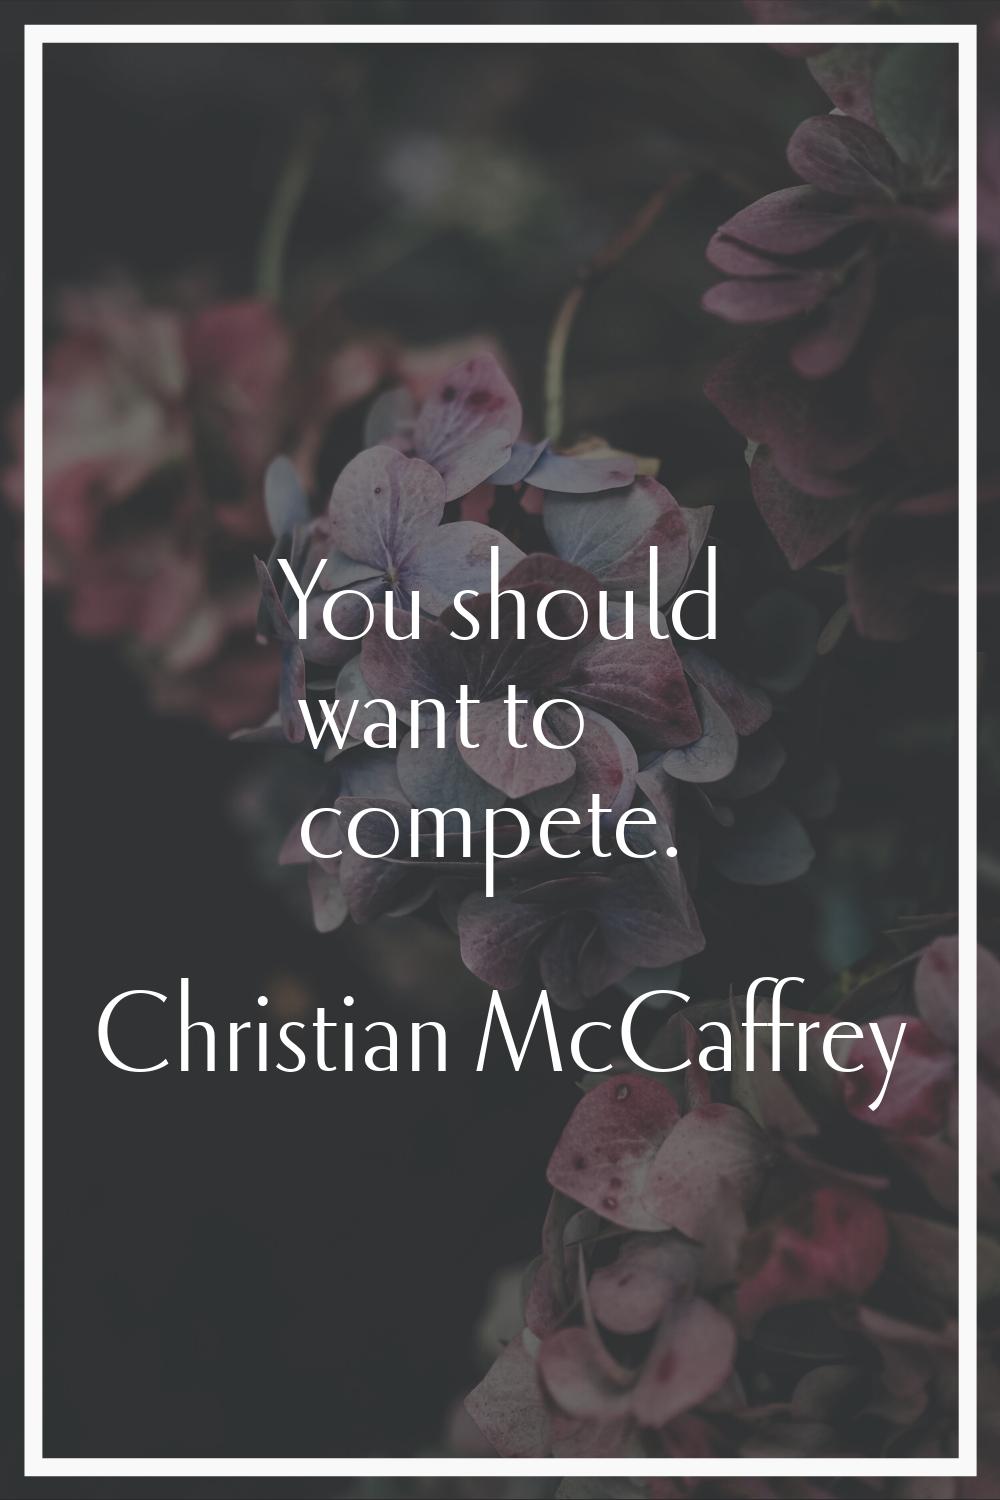 You should want to compete.